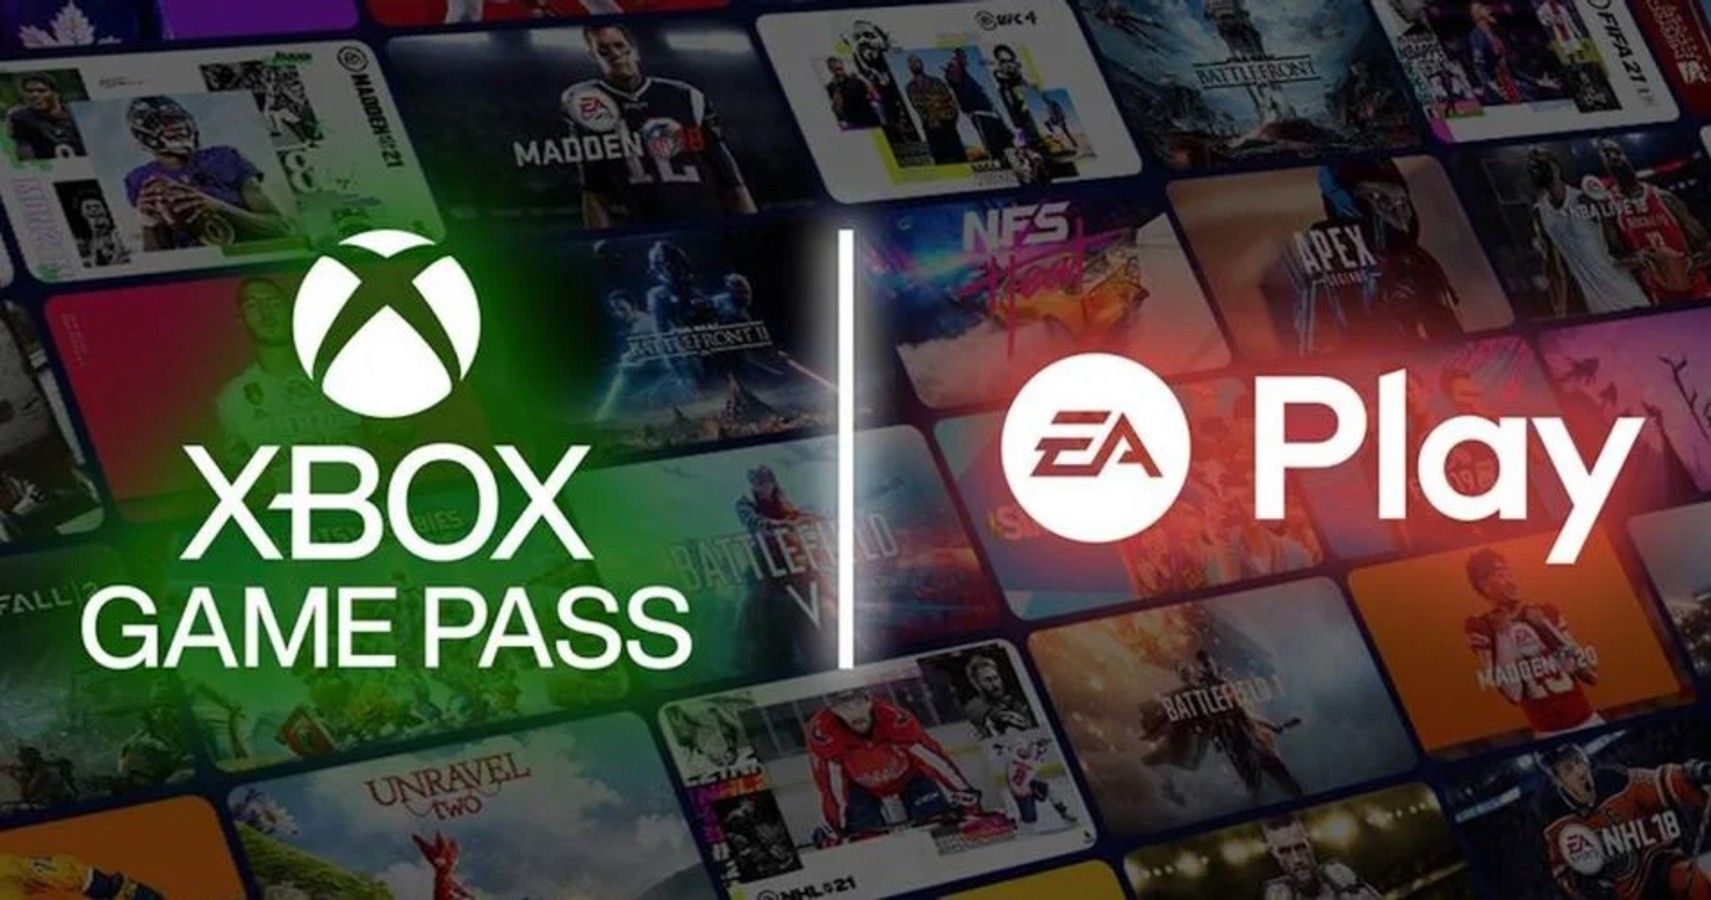 when a xbox game pass game go out you get a price discount